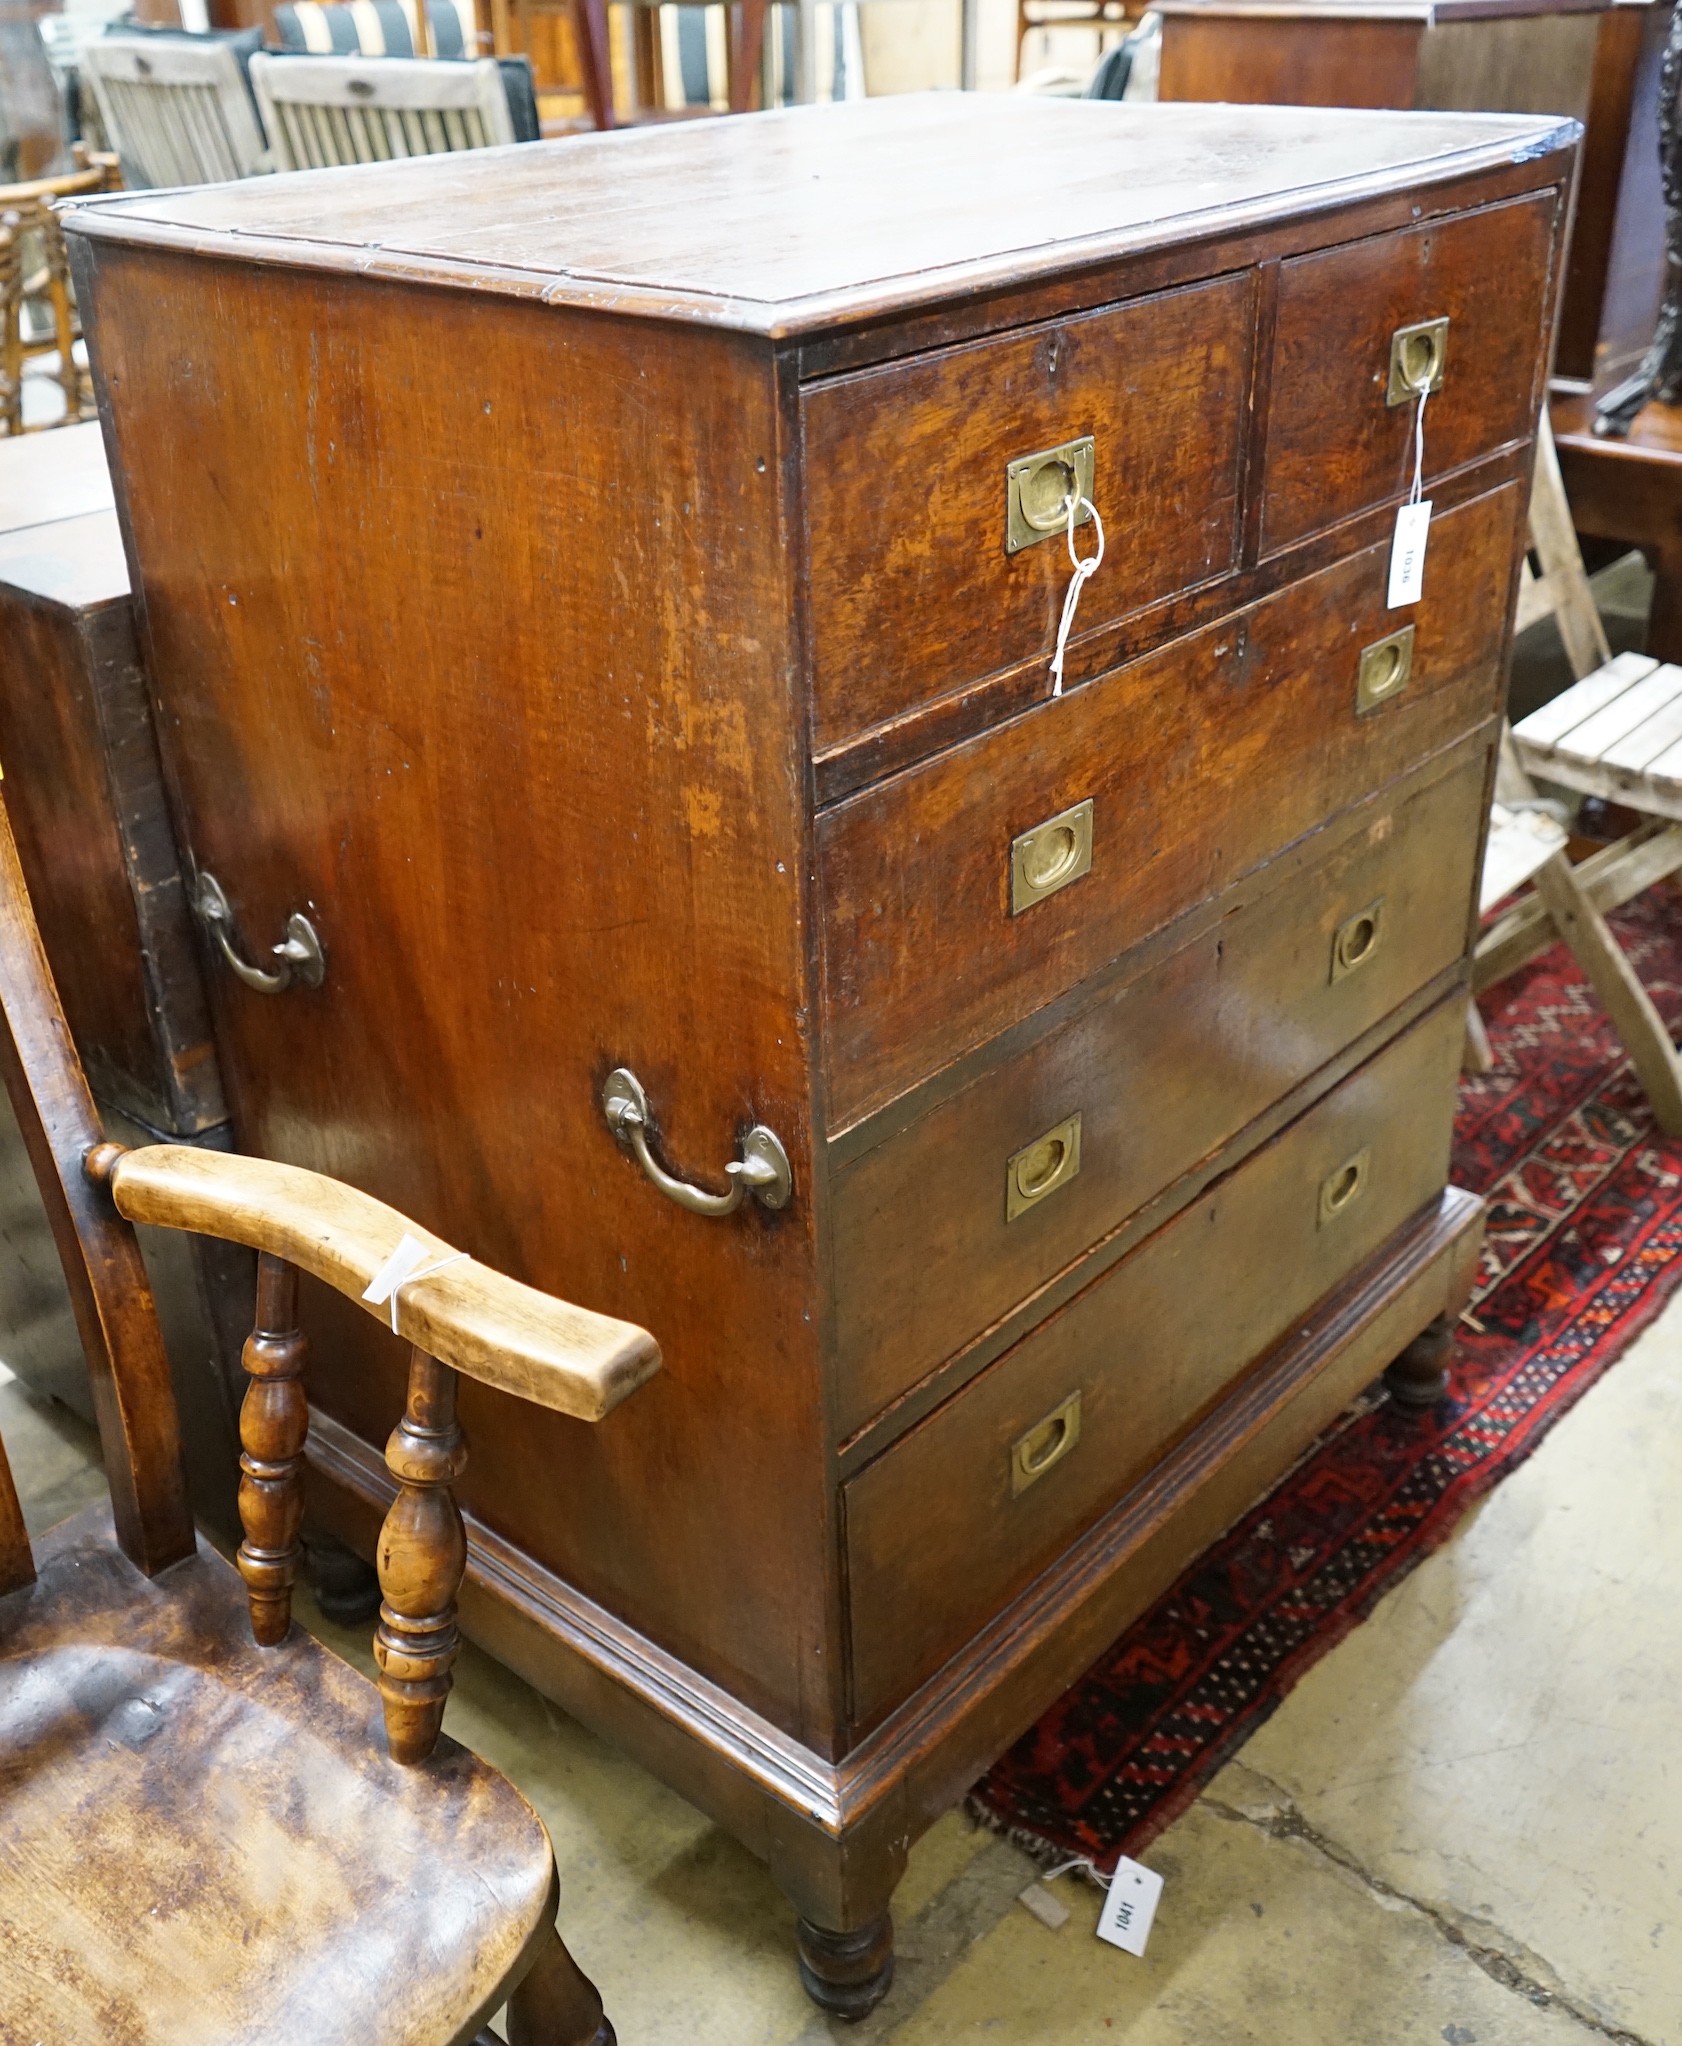 An early 19th century teak military chest with twin brass side handles, width 89cm, depth 62cm, height 117cm